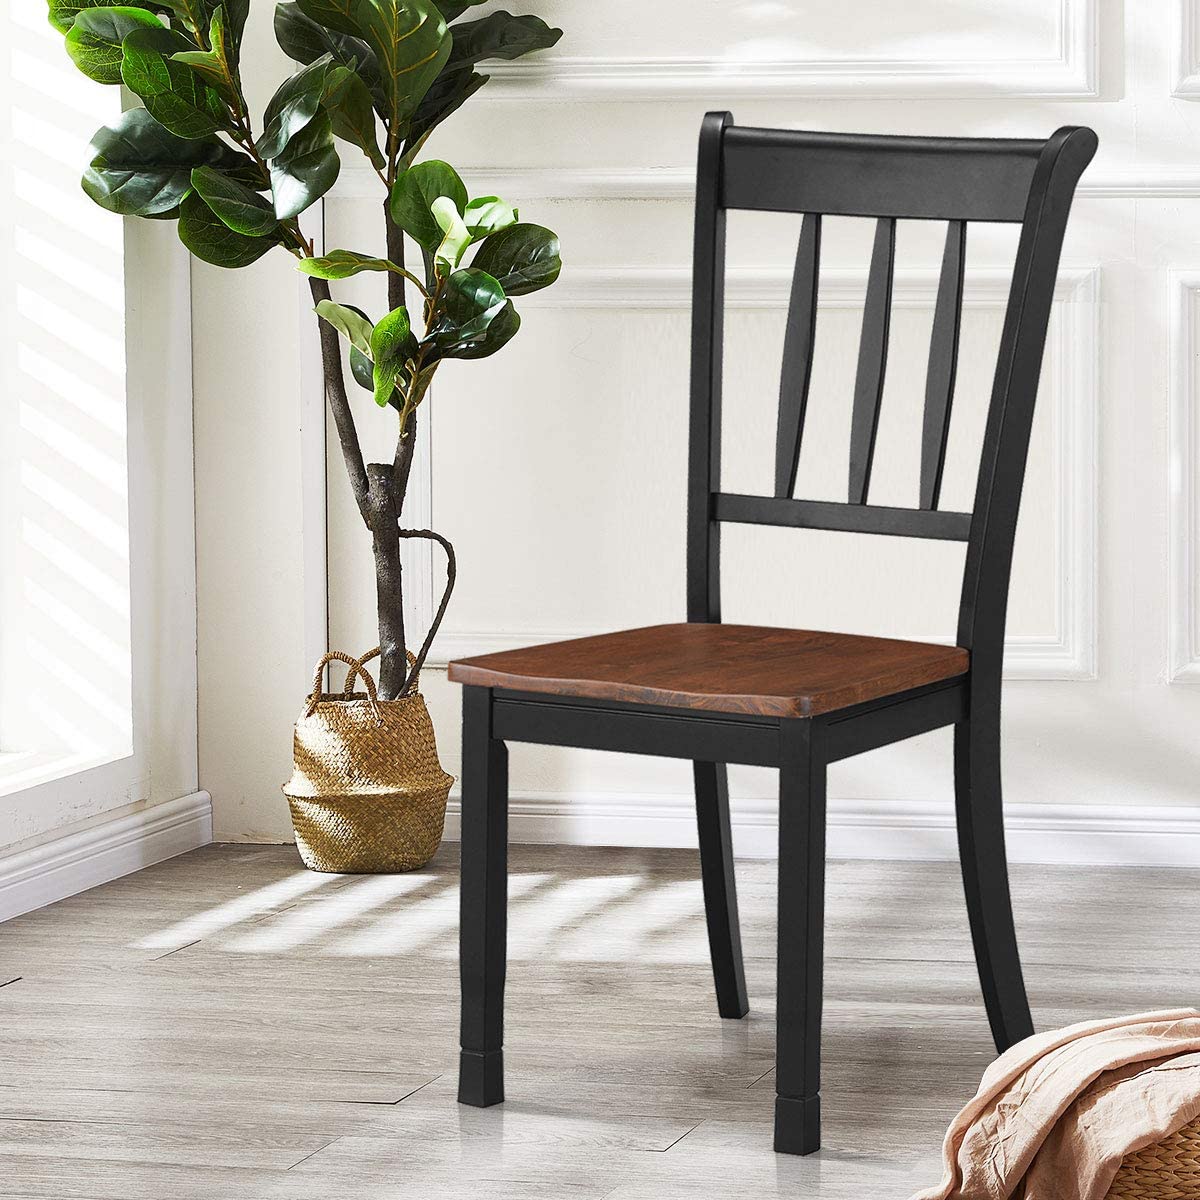 Solid Wood Whitesburg Dining Chairs Set of 4 - Giantexus